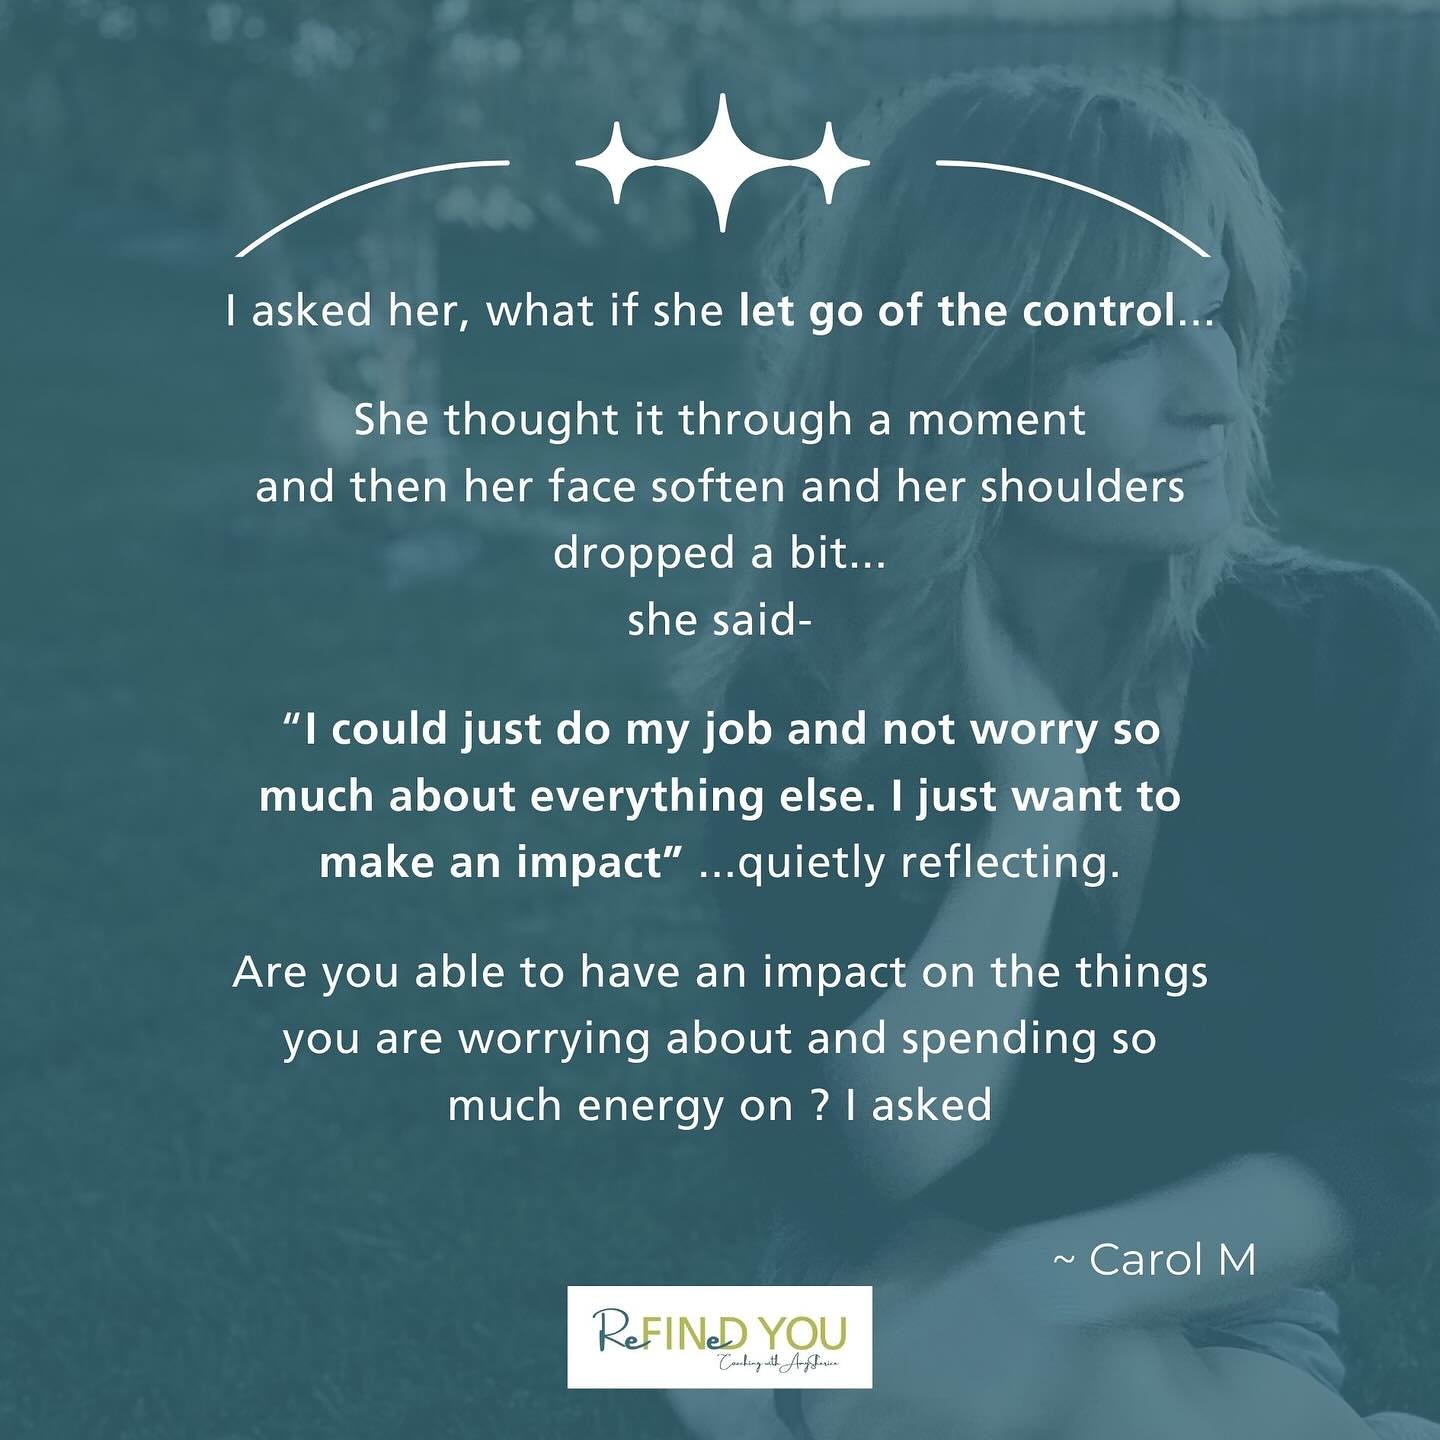 Coaching can be simple while having big impact. For Carol, many of our sessions continued to focus on identifying habits of overworking, ppl pleasing, over committing &amp; letting her ego push her to overstep her position at work. She also began to 